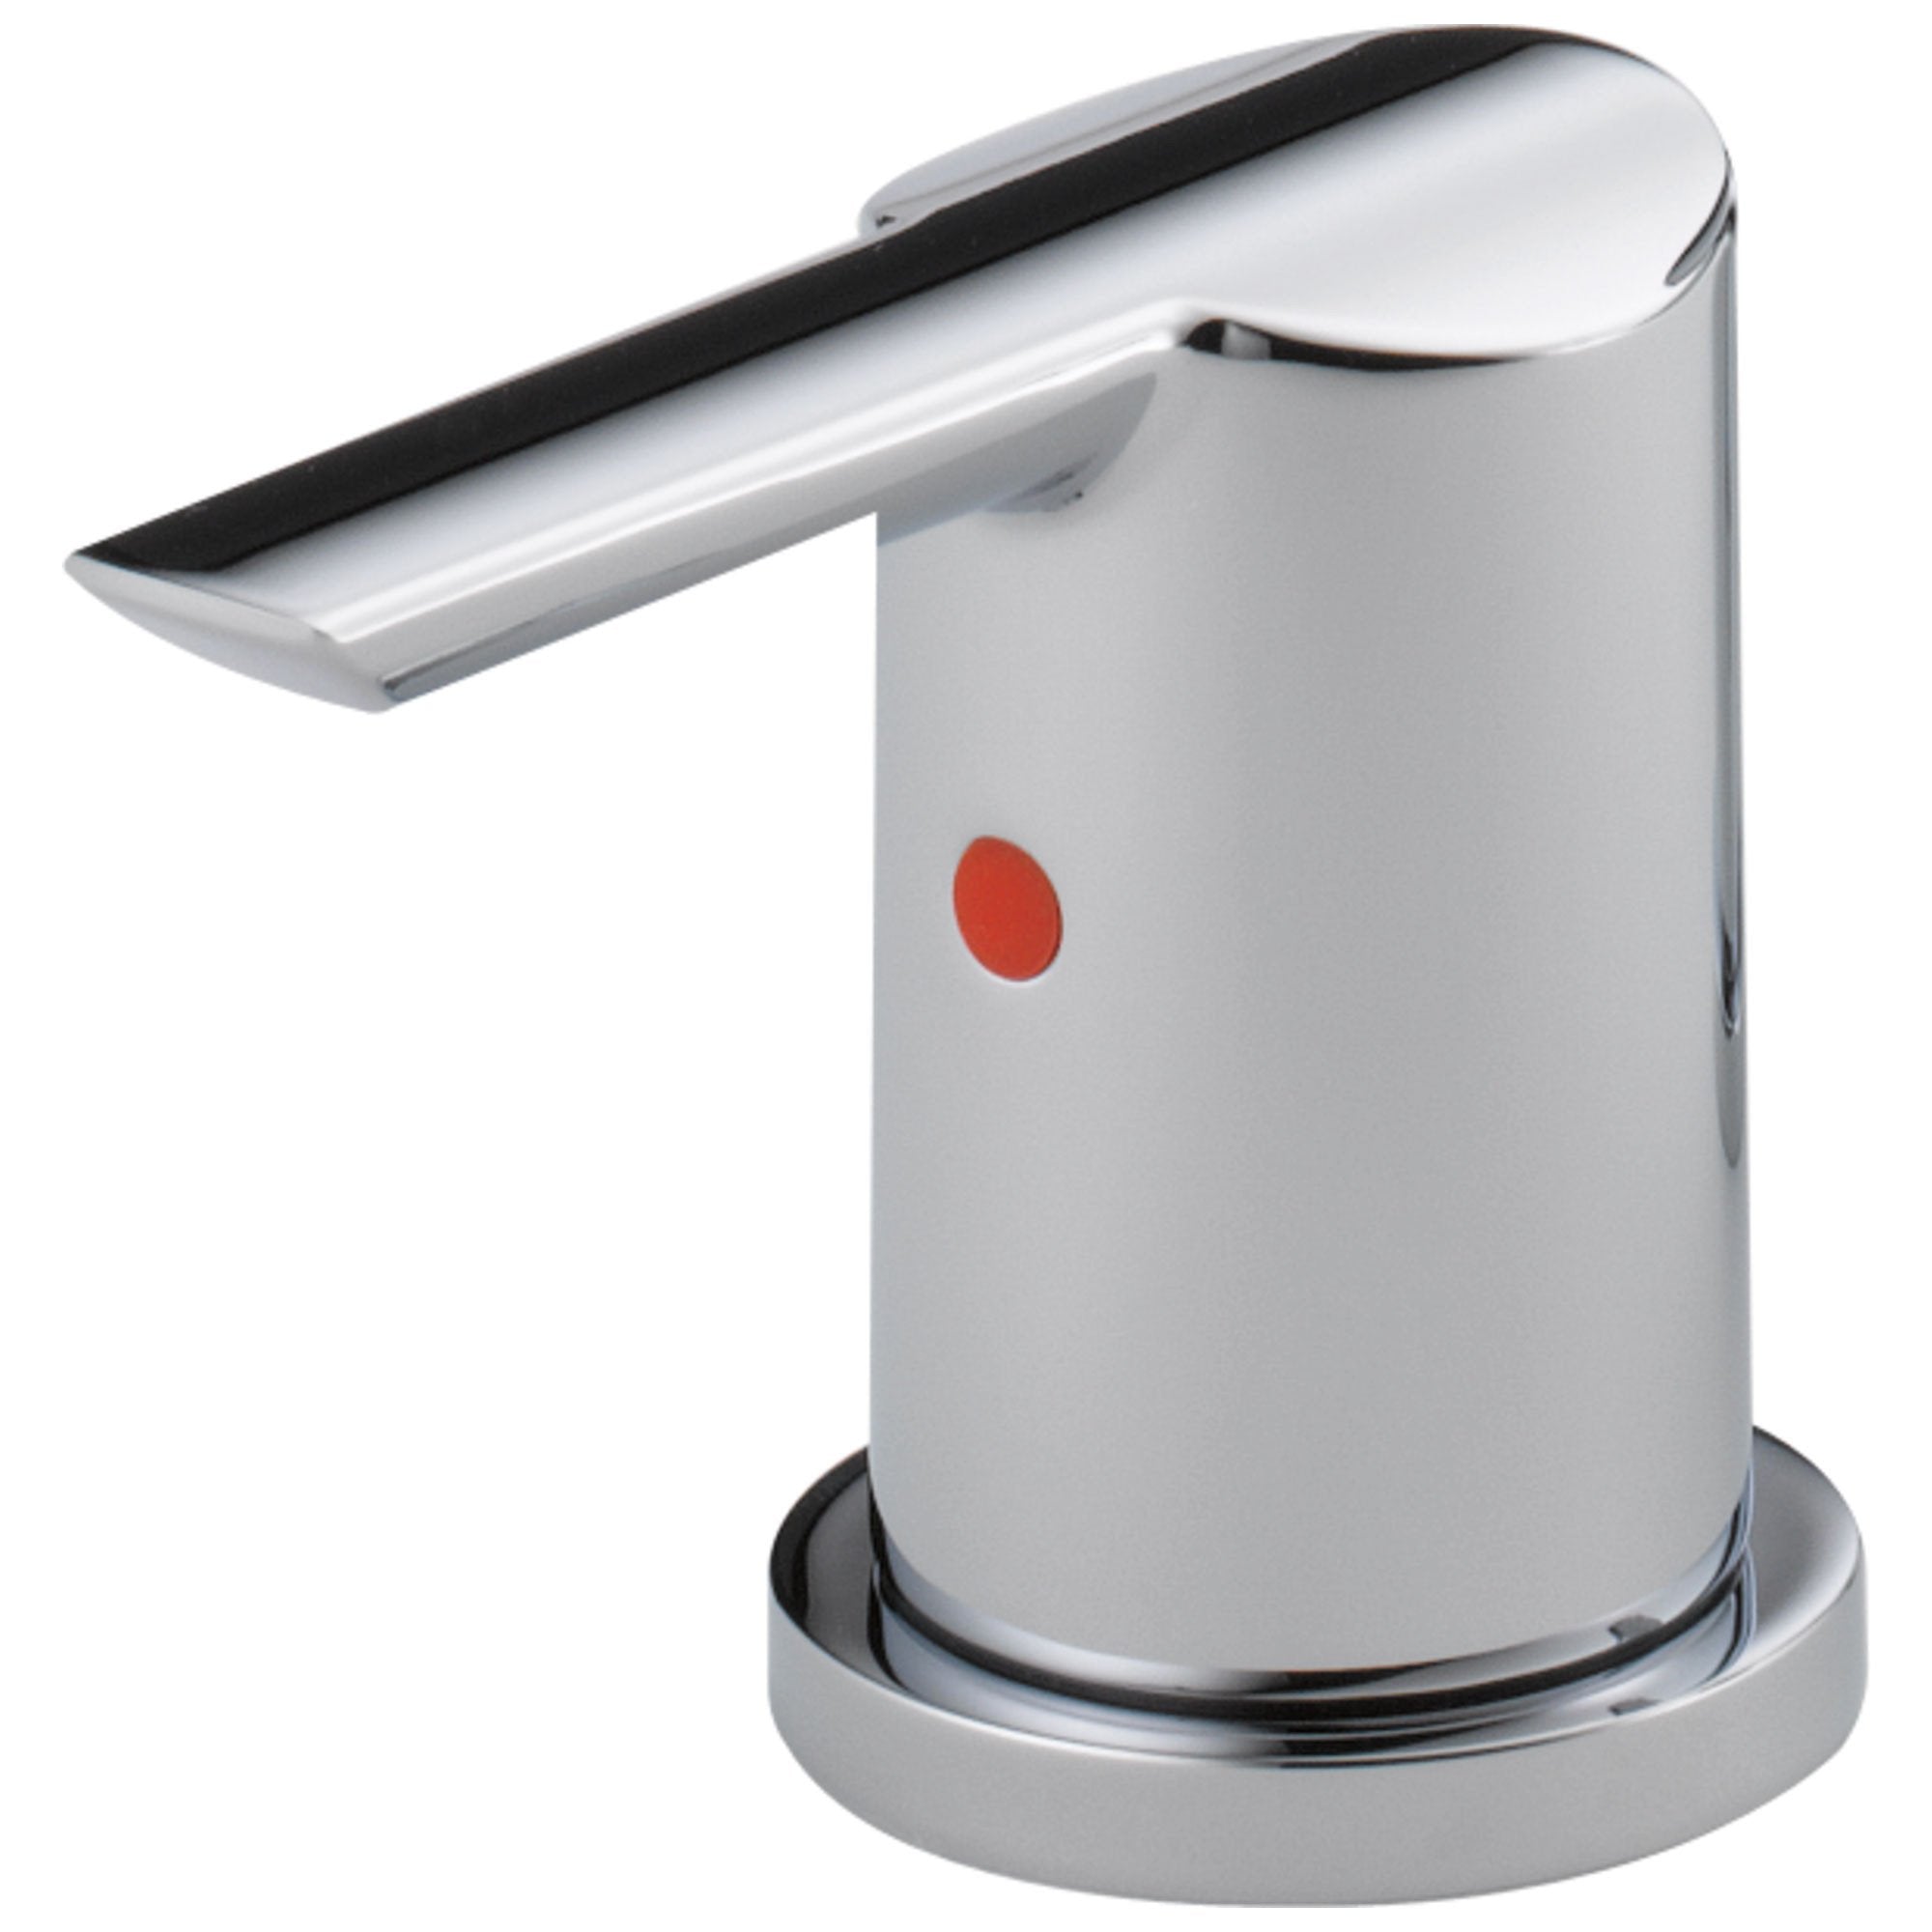 Delta Compel Collection Stainless Steel Finish Lavatory Metal Lever Handles - Quantity 2 Included DH261SS